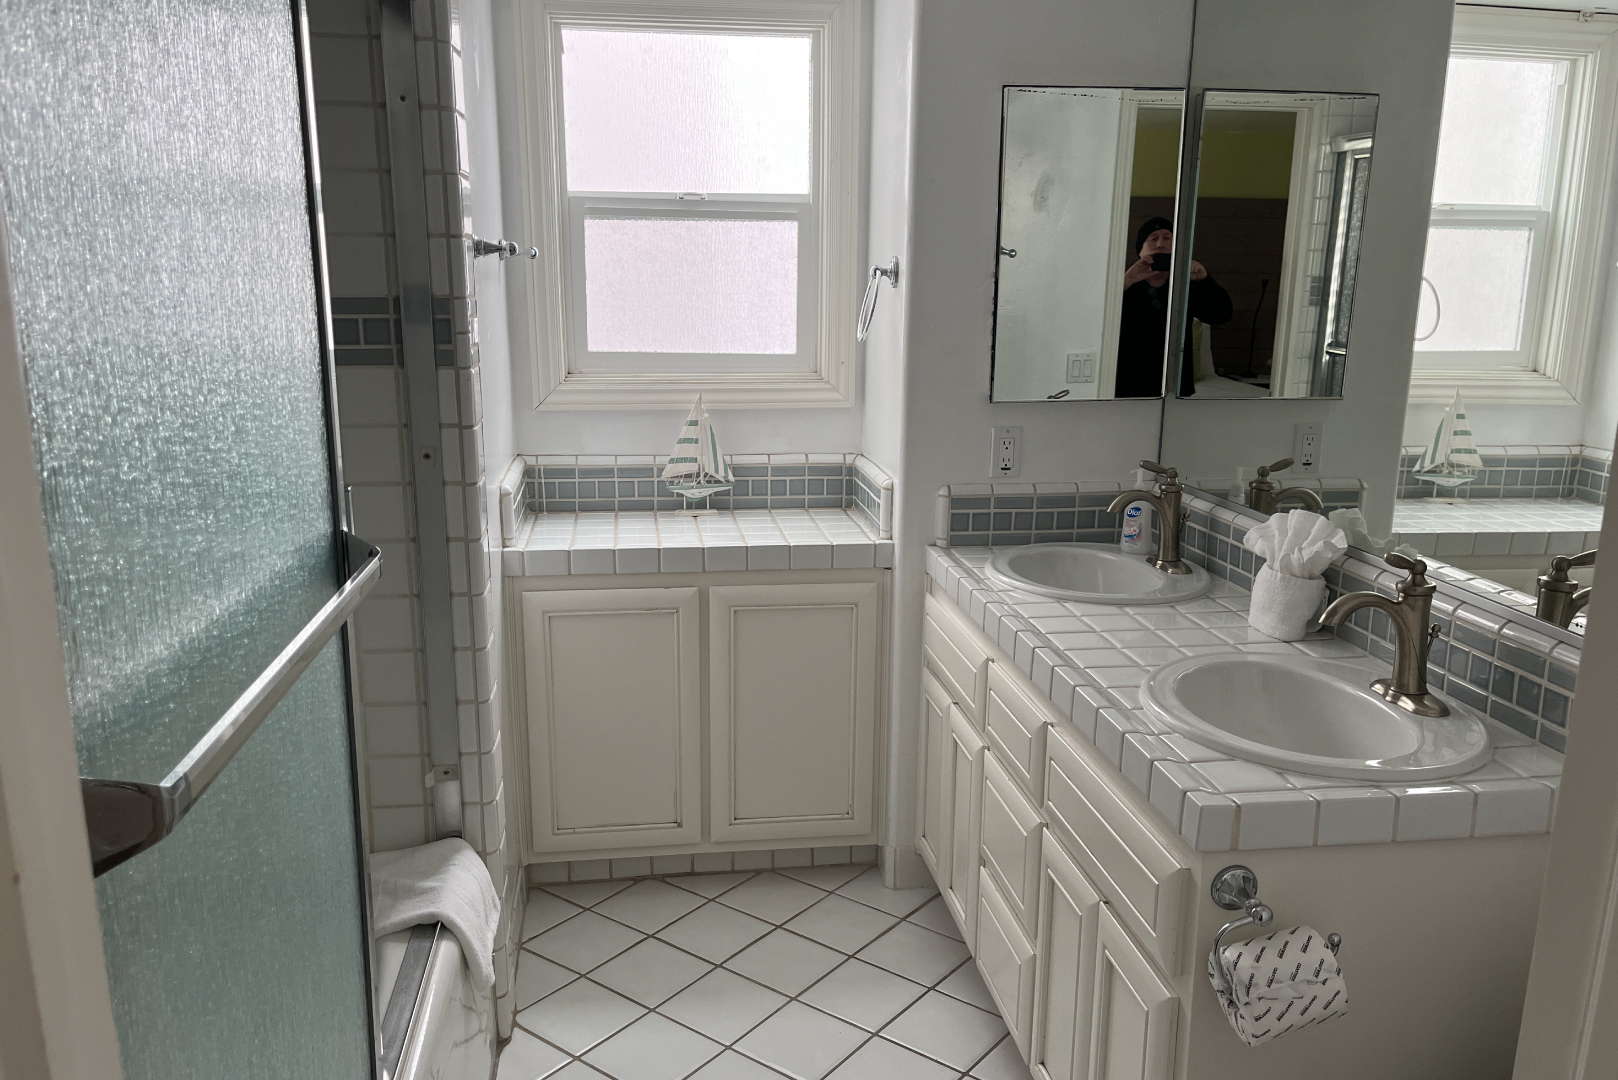 A view of the guest bathroom attached to the guest bedroom